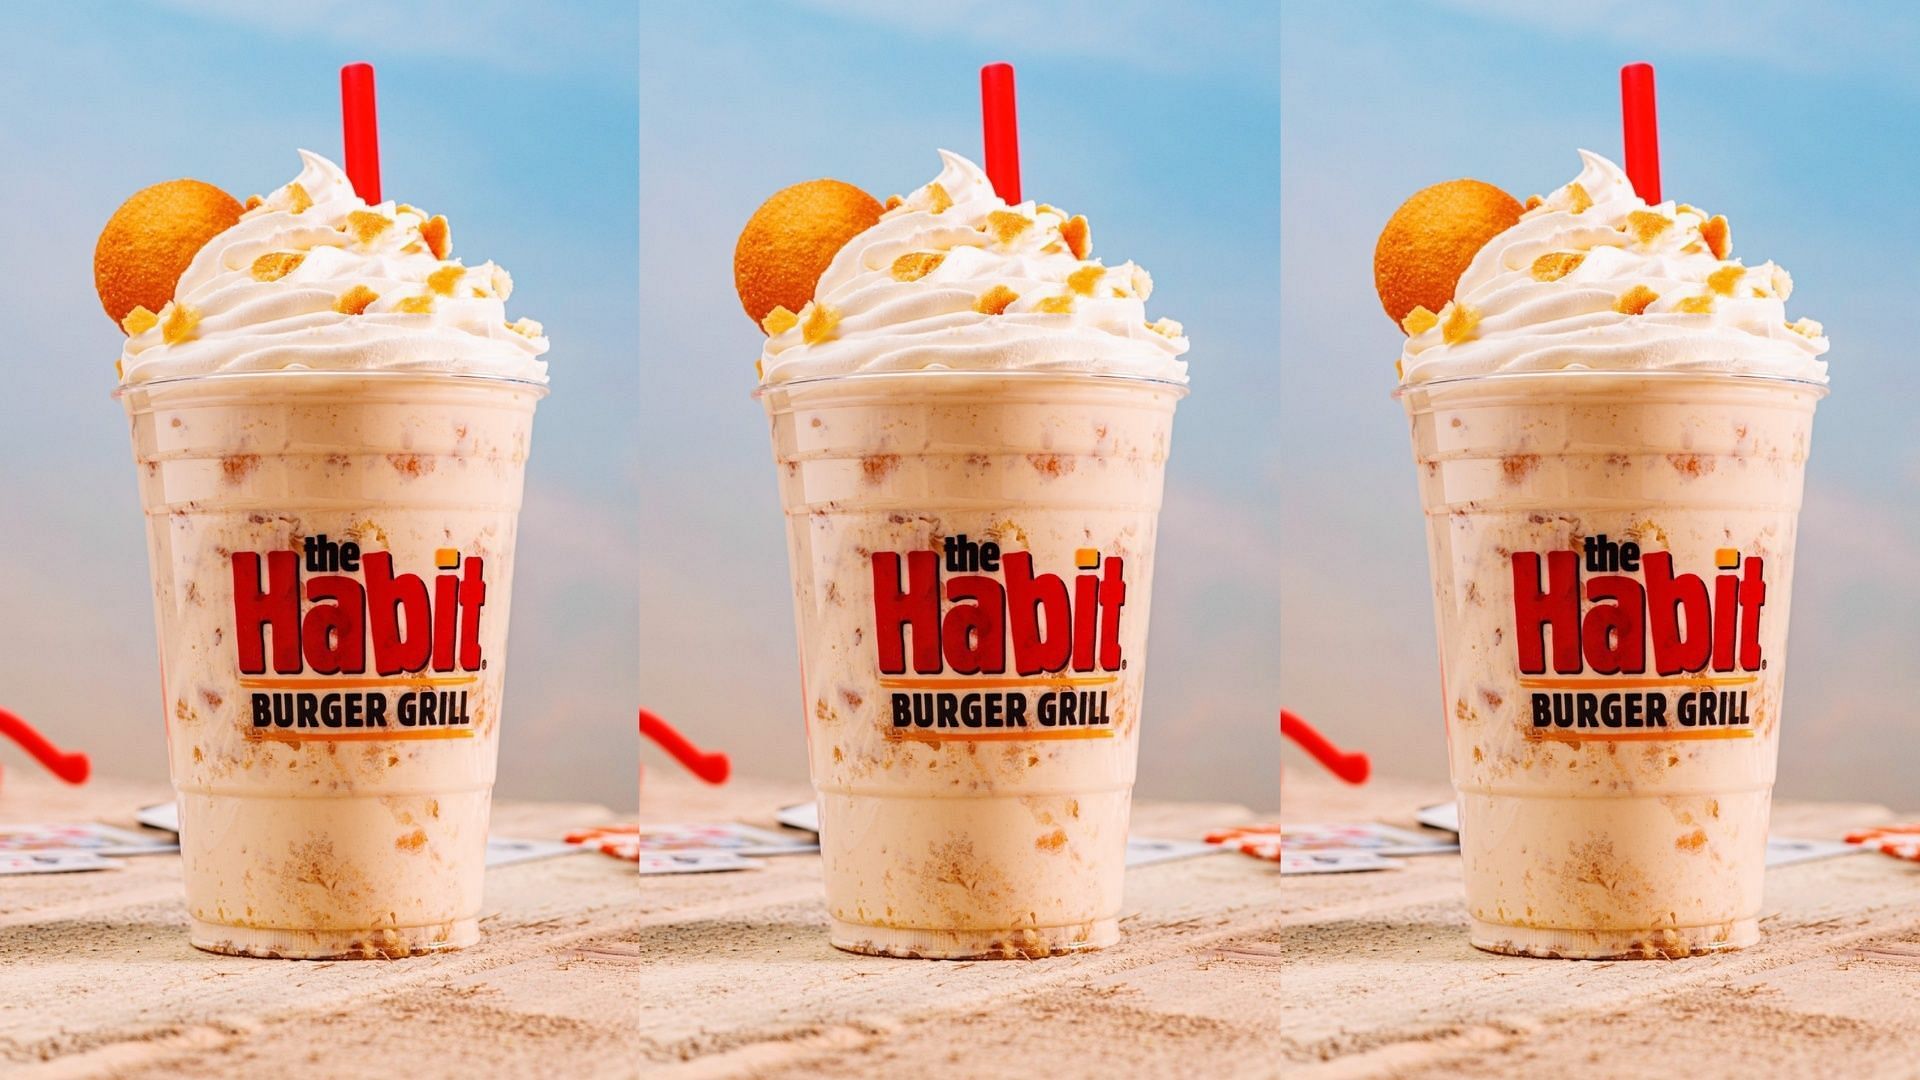 The new Banana Wafer Shake has been available on the menu since the first week of July (Image via The Habit Burger Grill)